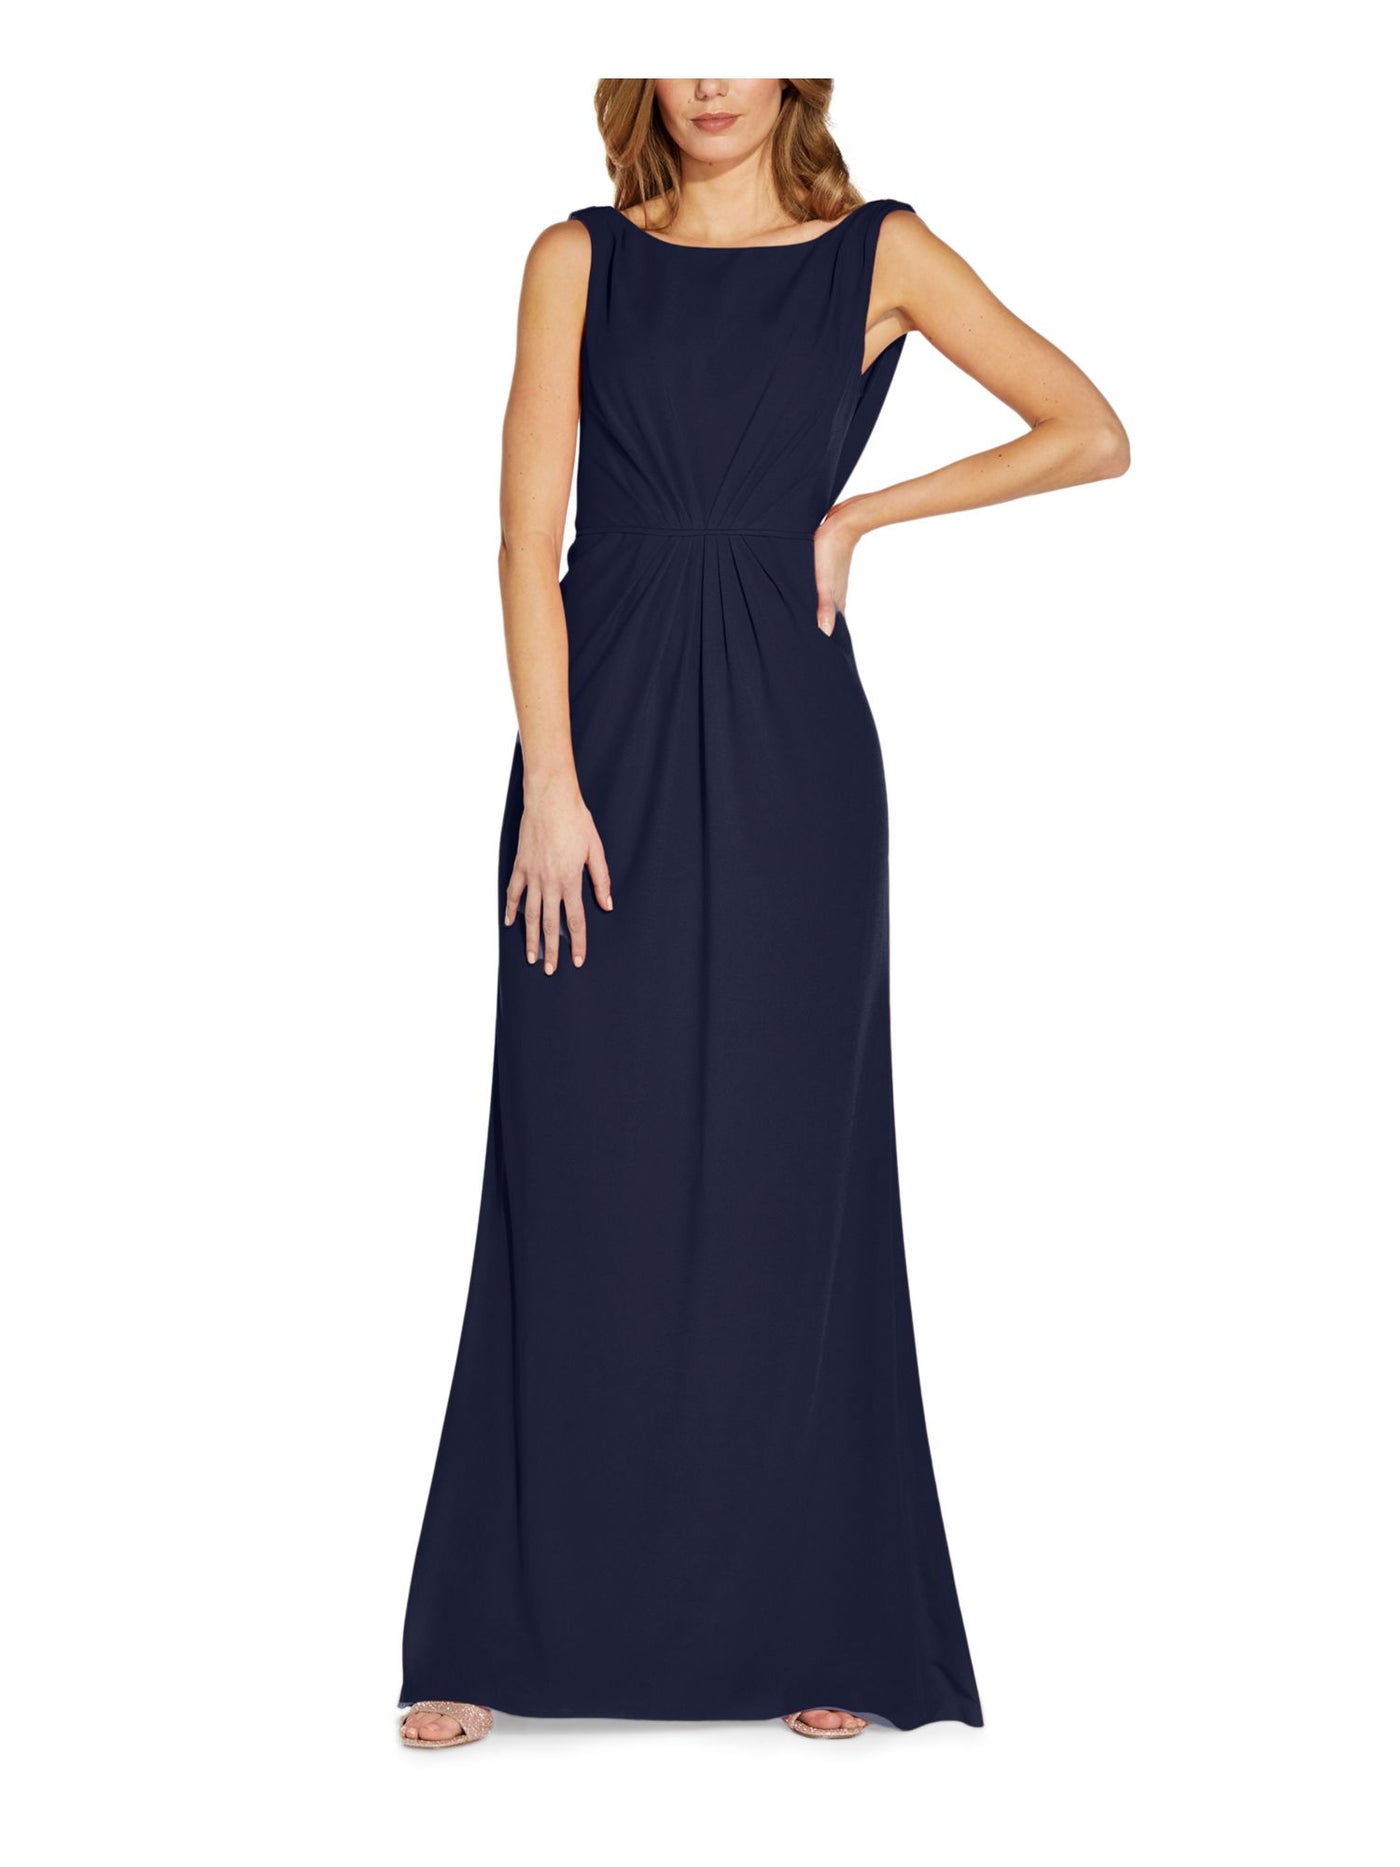 ADRIANNA PAPELL Womens Navy Stretch Pleated Zippered Drape Back Sleeveless Boat Neck Full-Length Evening Gown Dress 4